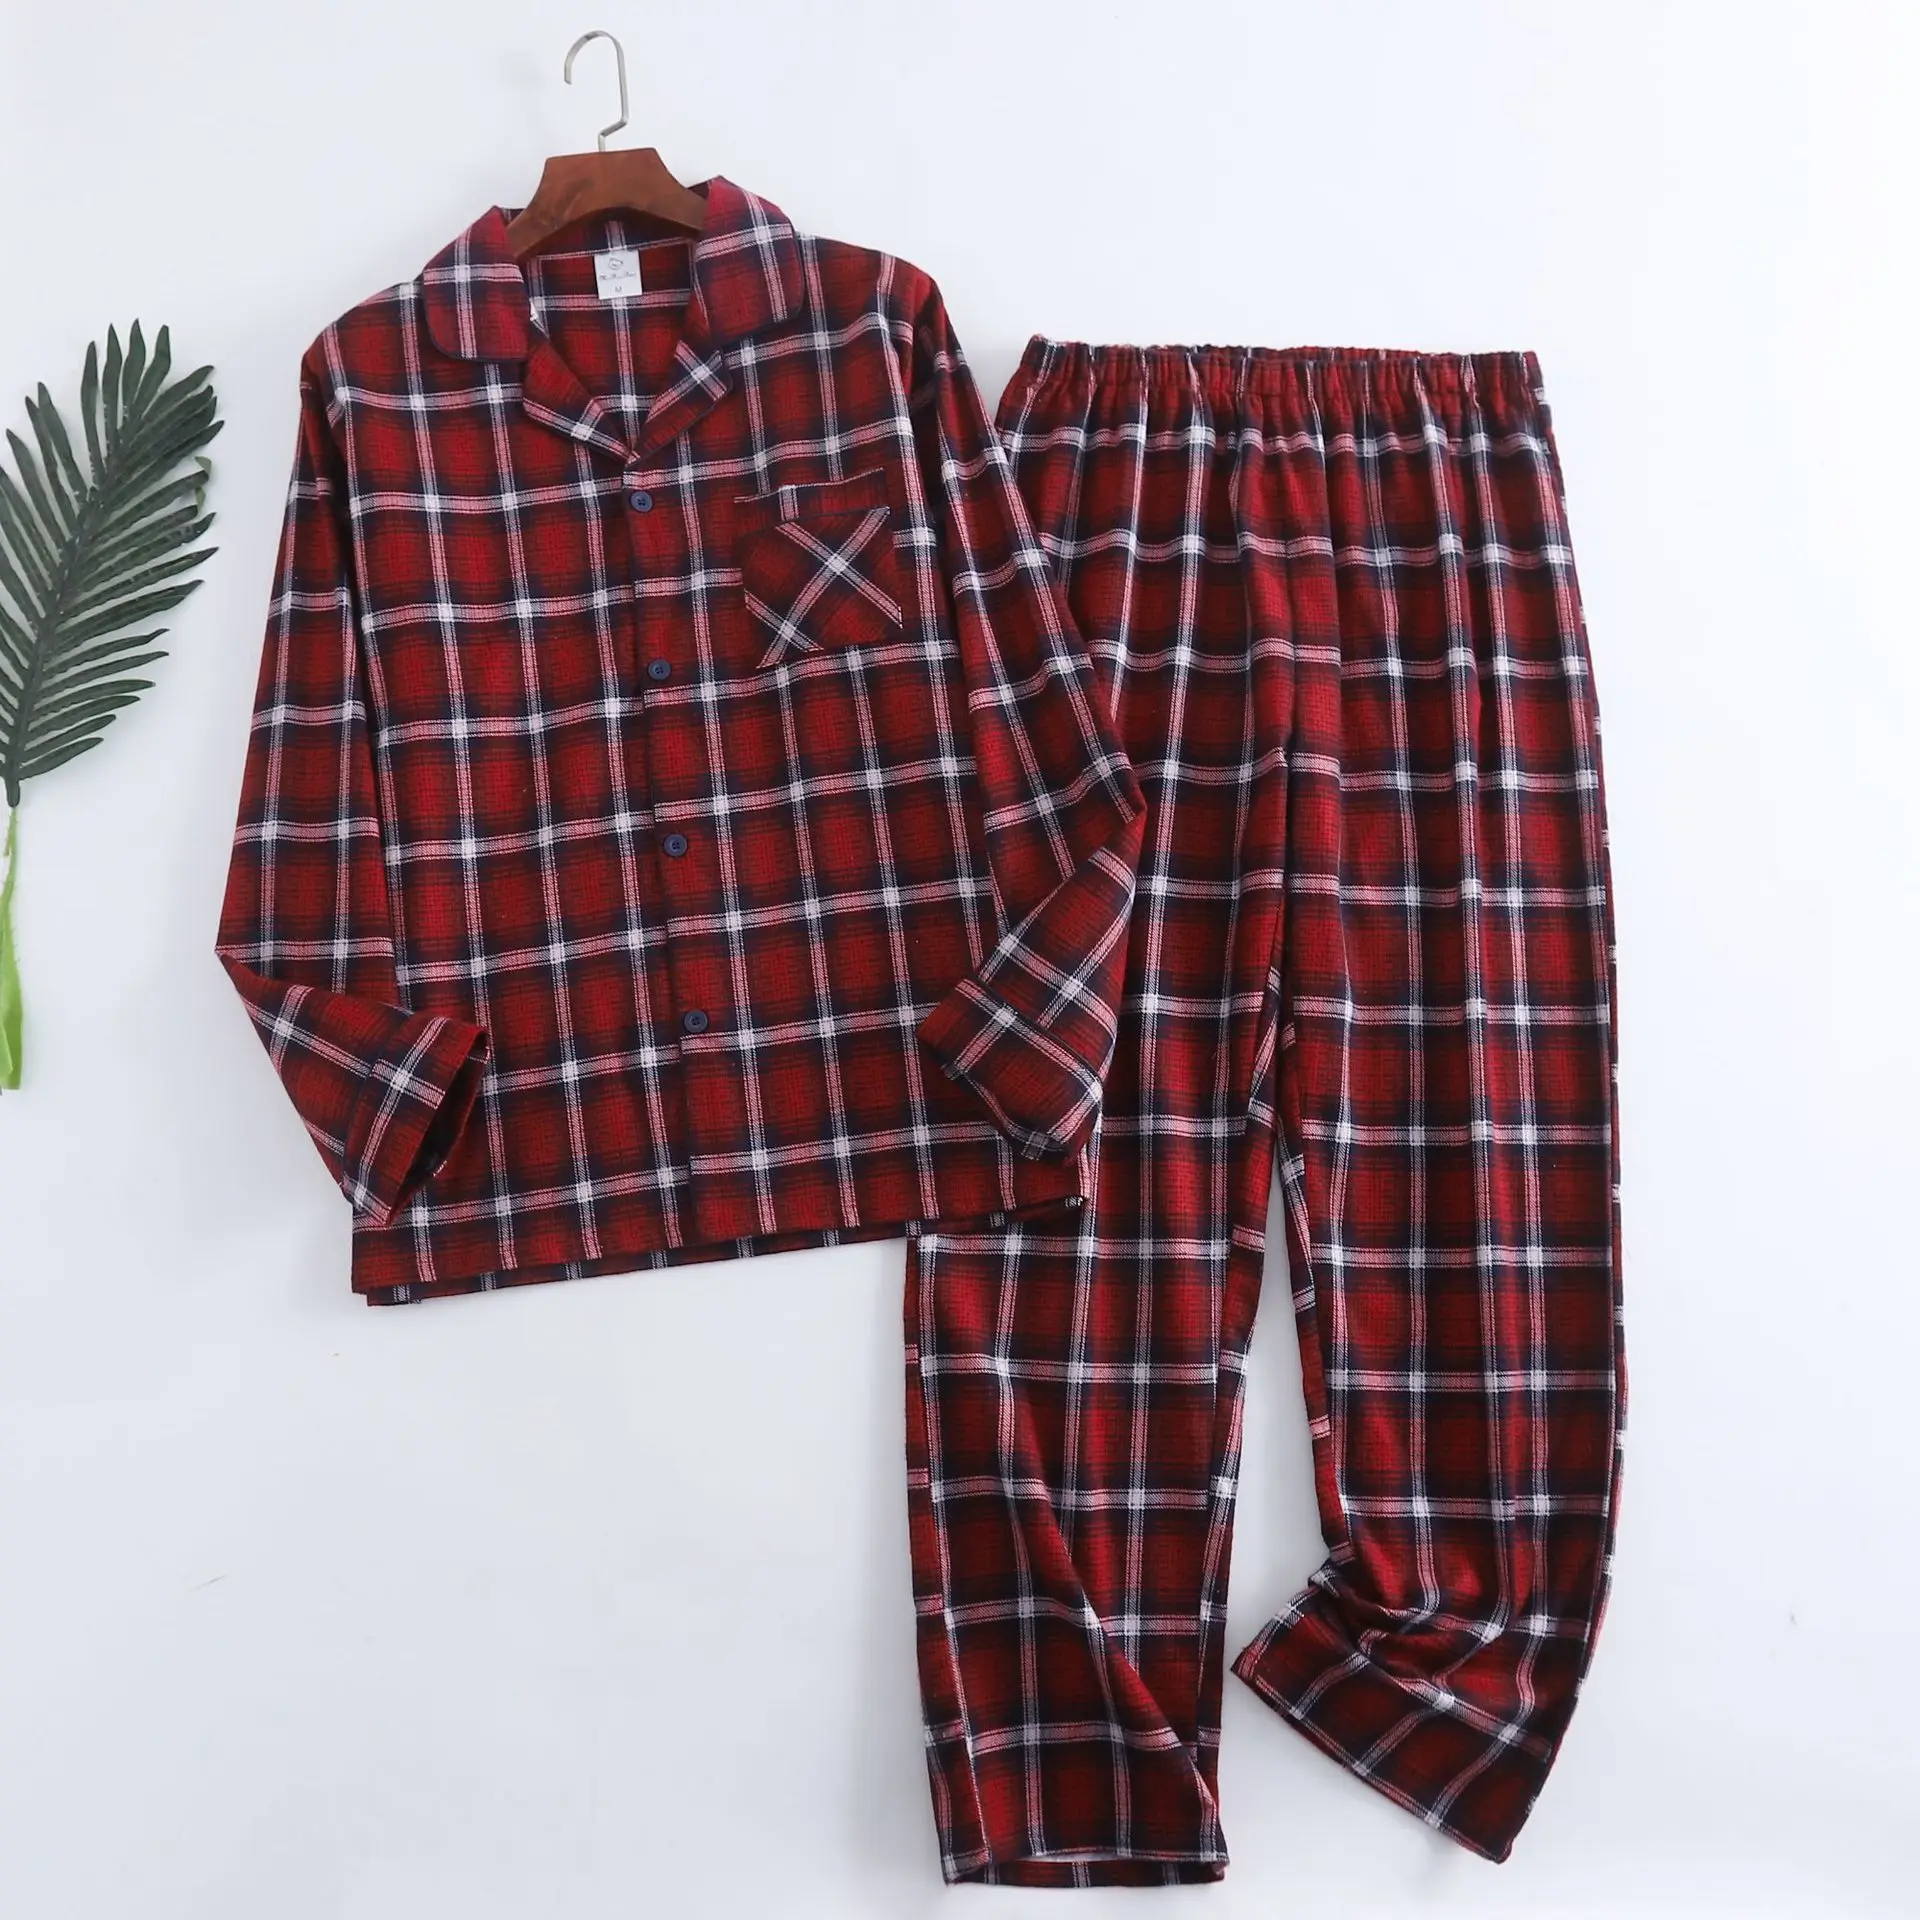 Pajamas Plaid Design Multi Colors Flannel Long-sleeved Trousers Warm Homewear for Men Autumn and Winter Sleepwear Sets enlarge